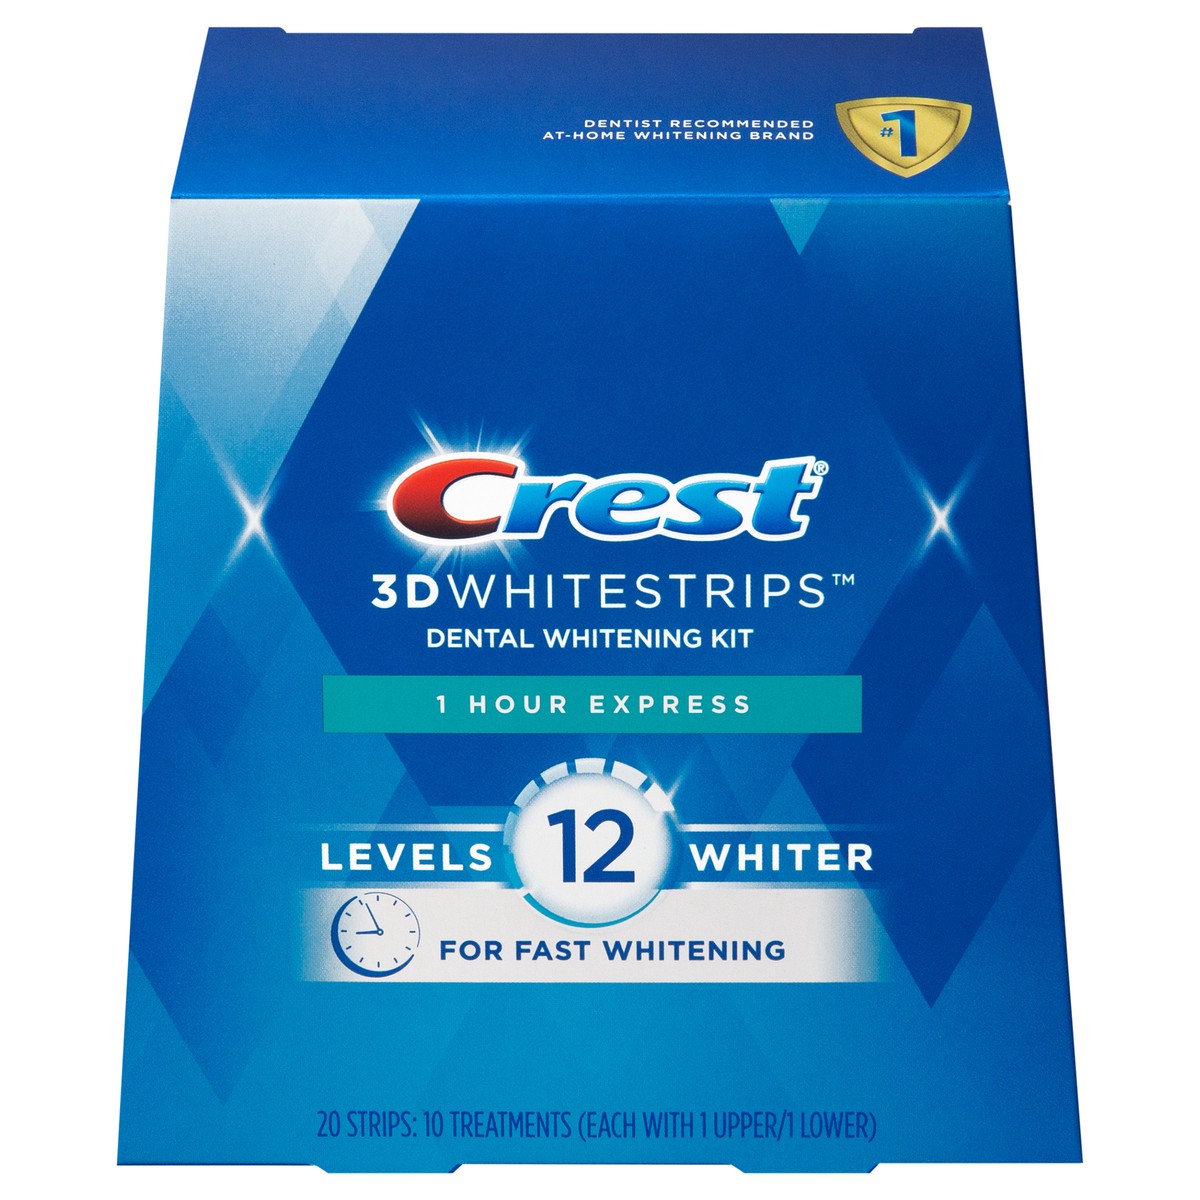 slide 1 of 5, Crest 3D Whitrstrips 1-Hour Express At-home Teeth Whitening Kit, 10 Treatments, 12 Levels Whiter for Fast Whitening, 20 ct